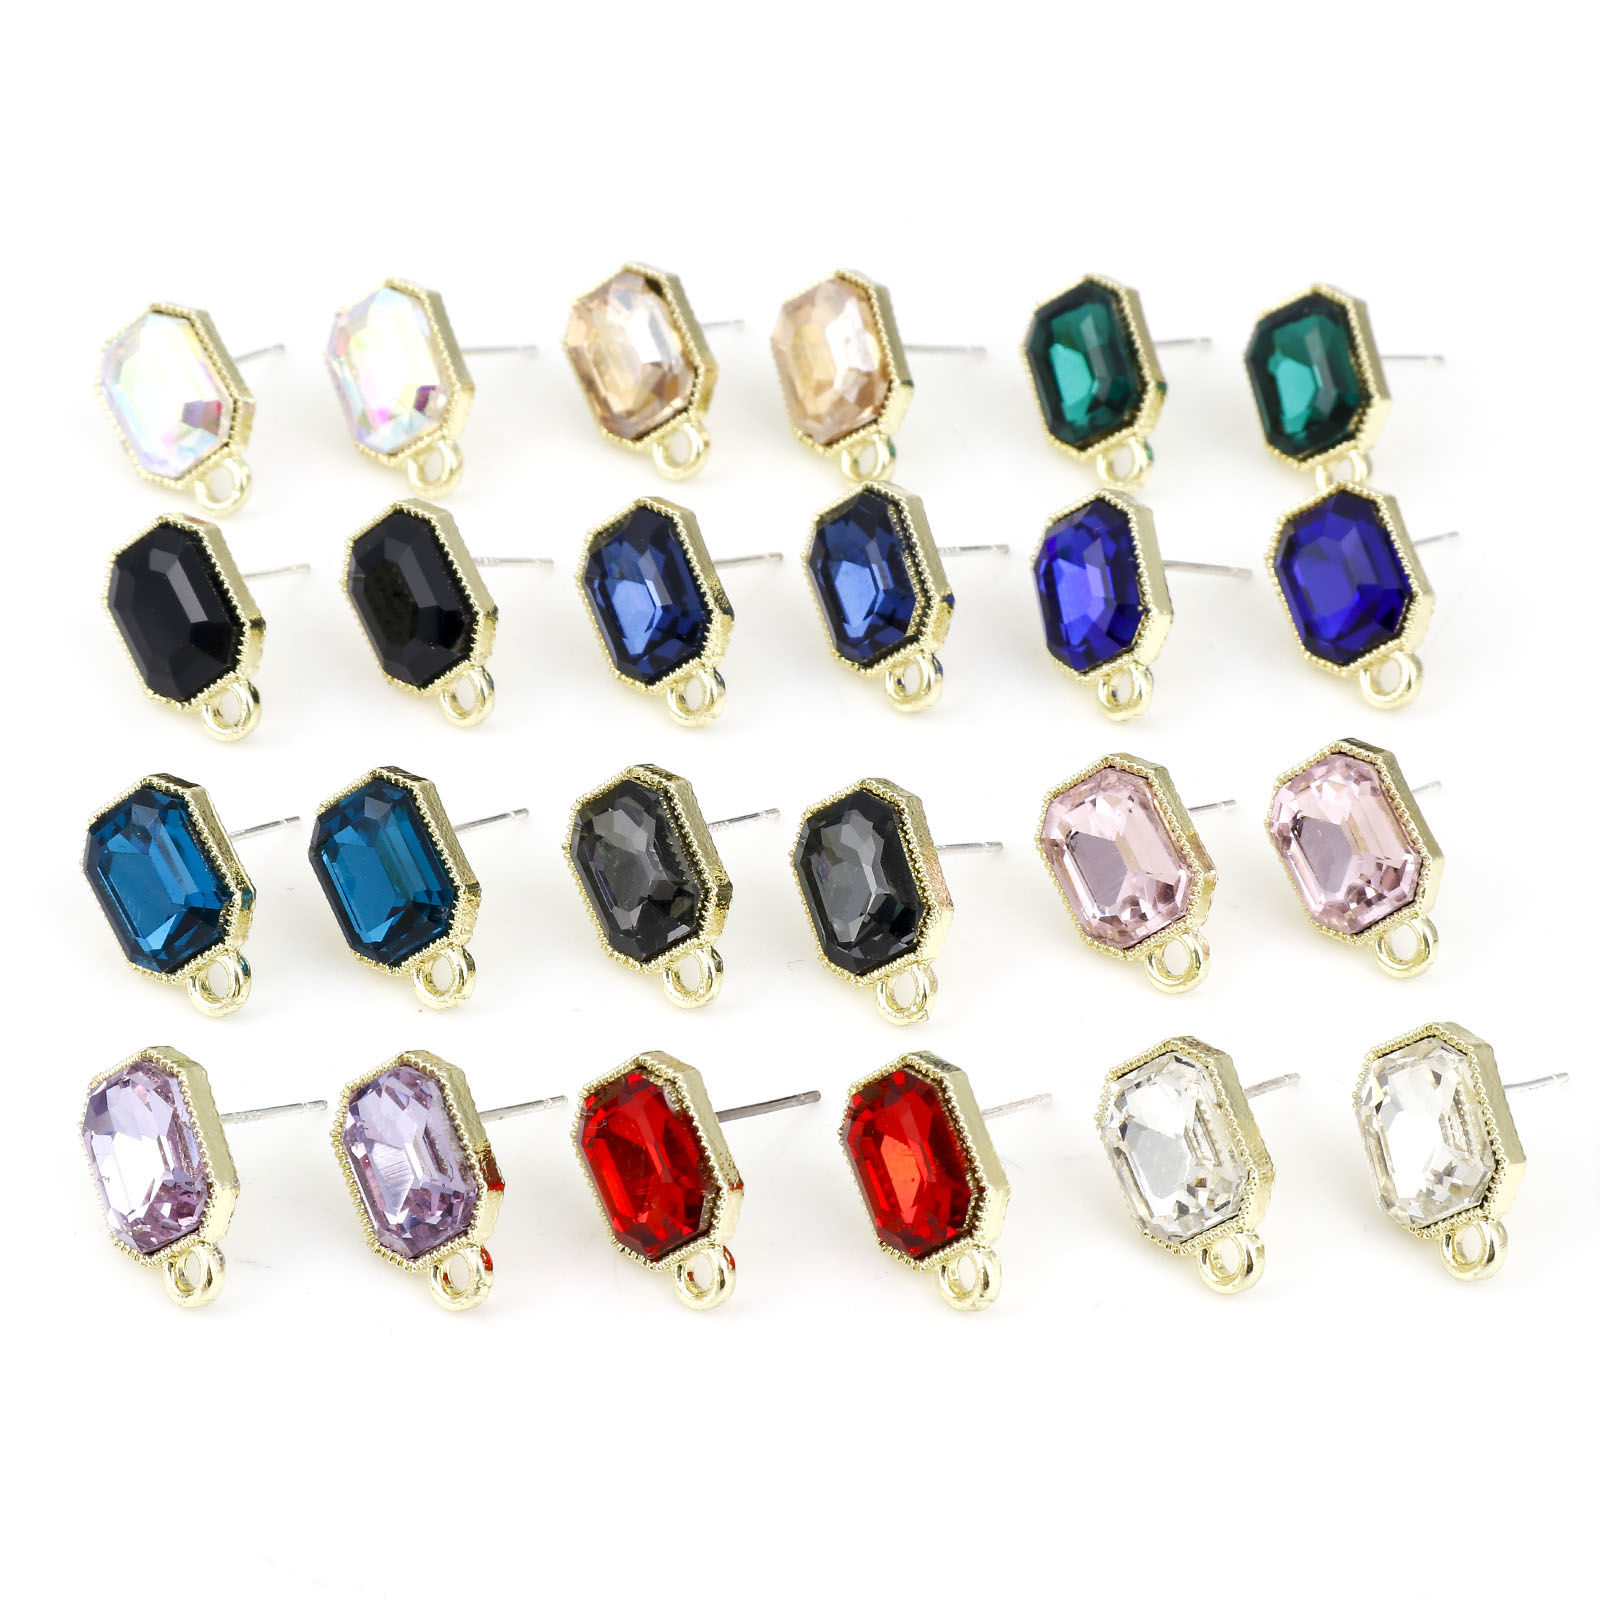 Picture of Zinc Based Alloy & Glass Geometry Series Ear Post Stud Earrings Findings Octagon Gold Plated Multicolor W/ Loop 15mm x 10mm, Post/ Wire Size: 0.7mm, 6 PCs